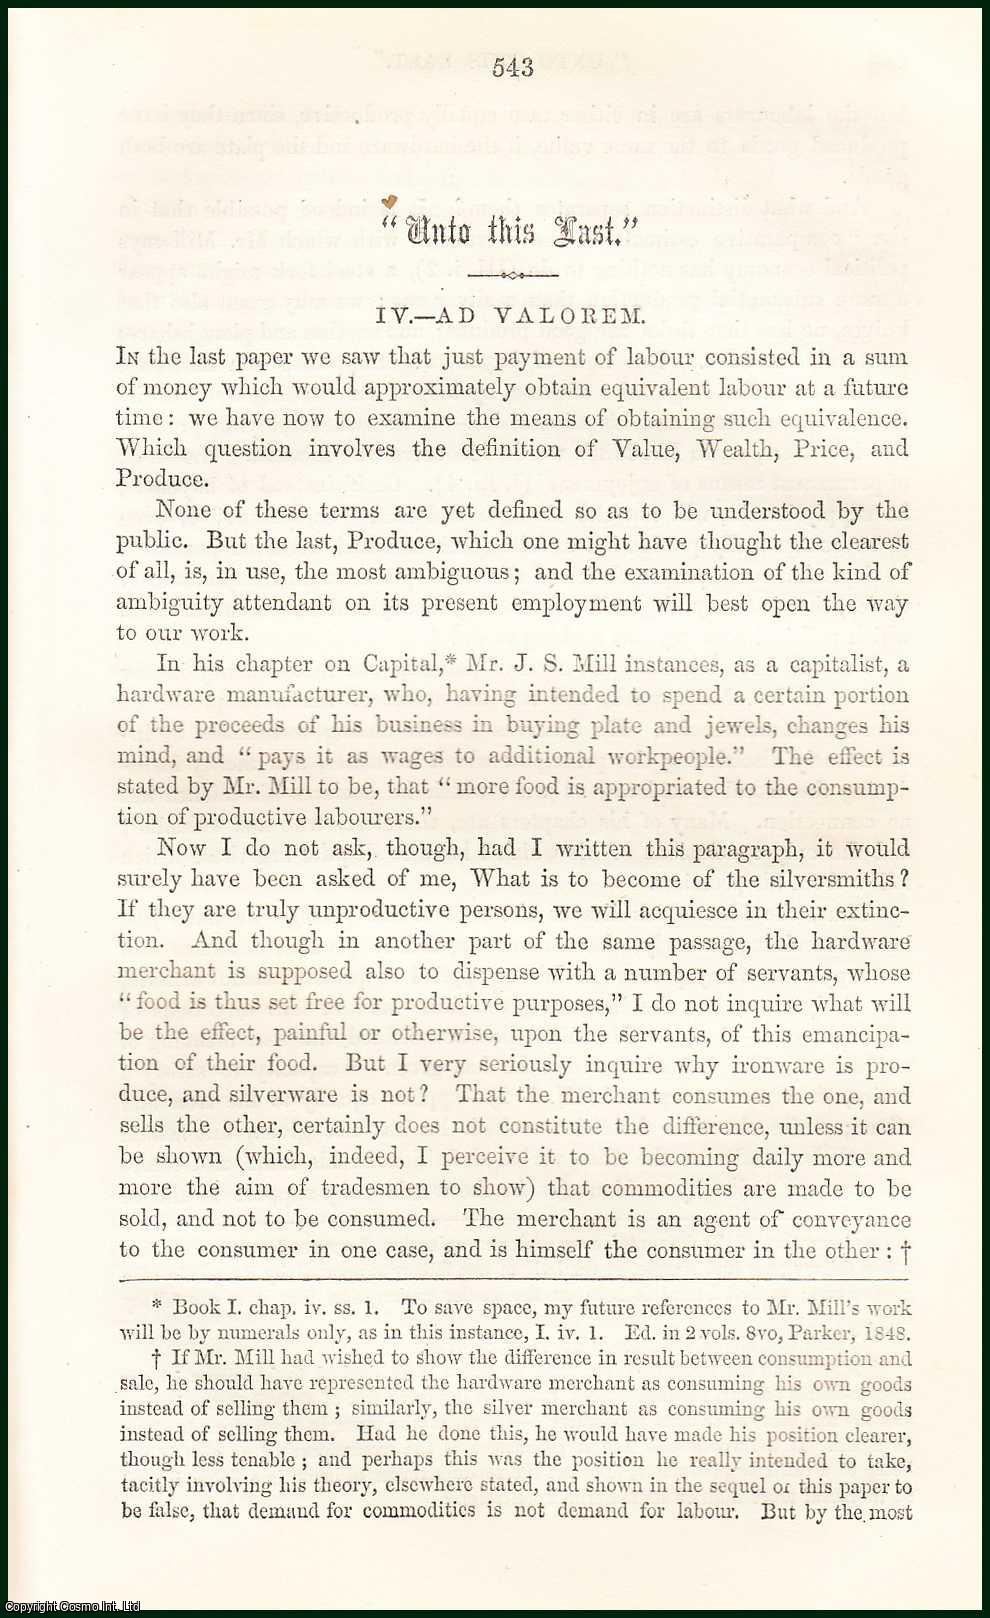 John Ruskin - Ad Valorem : Unto This Last. An Essay on The First Principles Political Economy. An uncommon original article from the Cornhill Magazine, 1860.